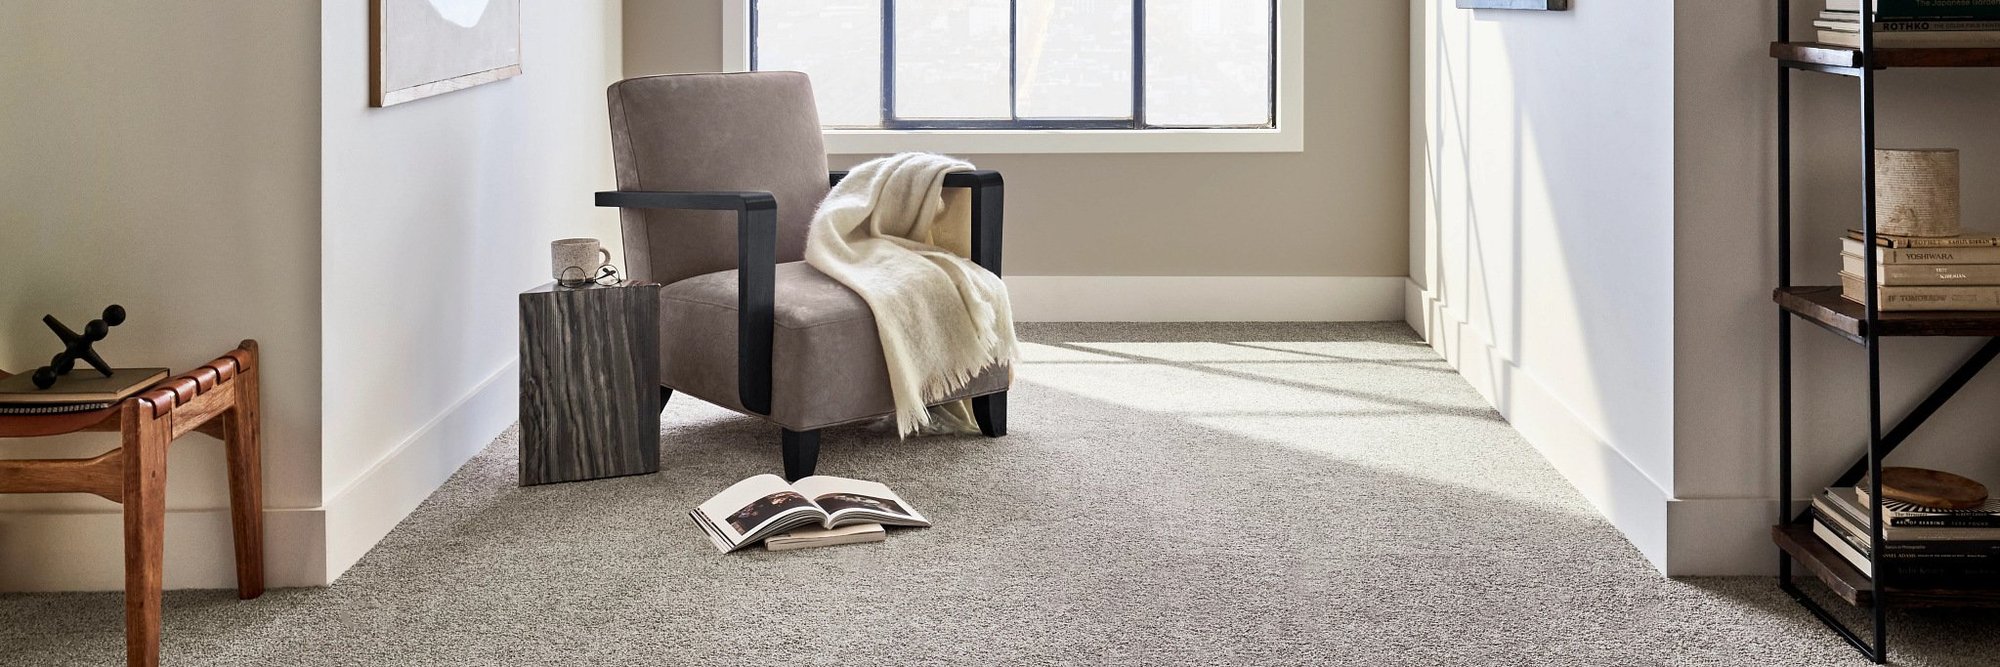 gray armchair on brown carpet from Anderson Flooring Centre, Inc. in Winnipeg, MB